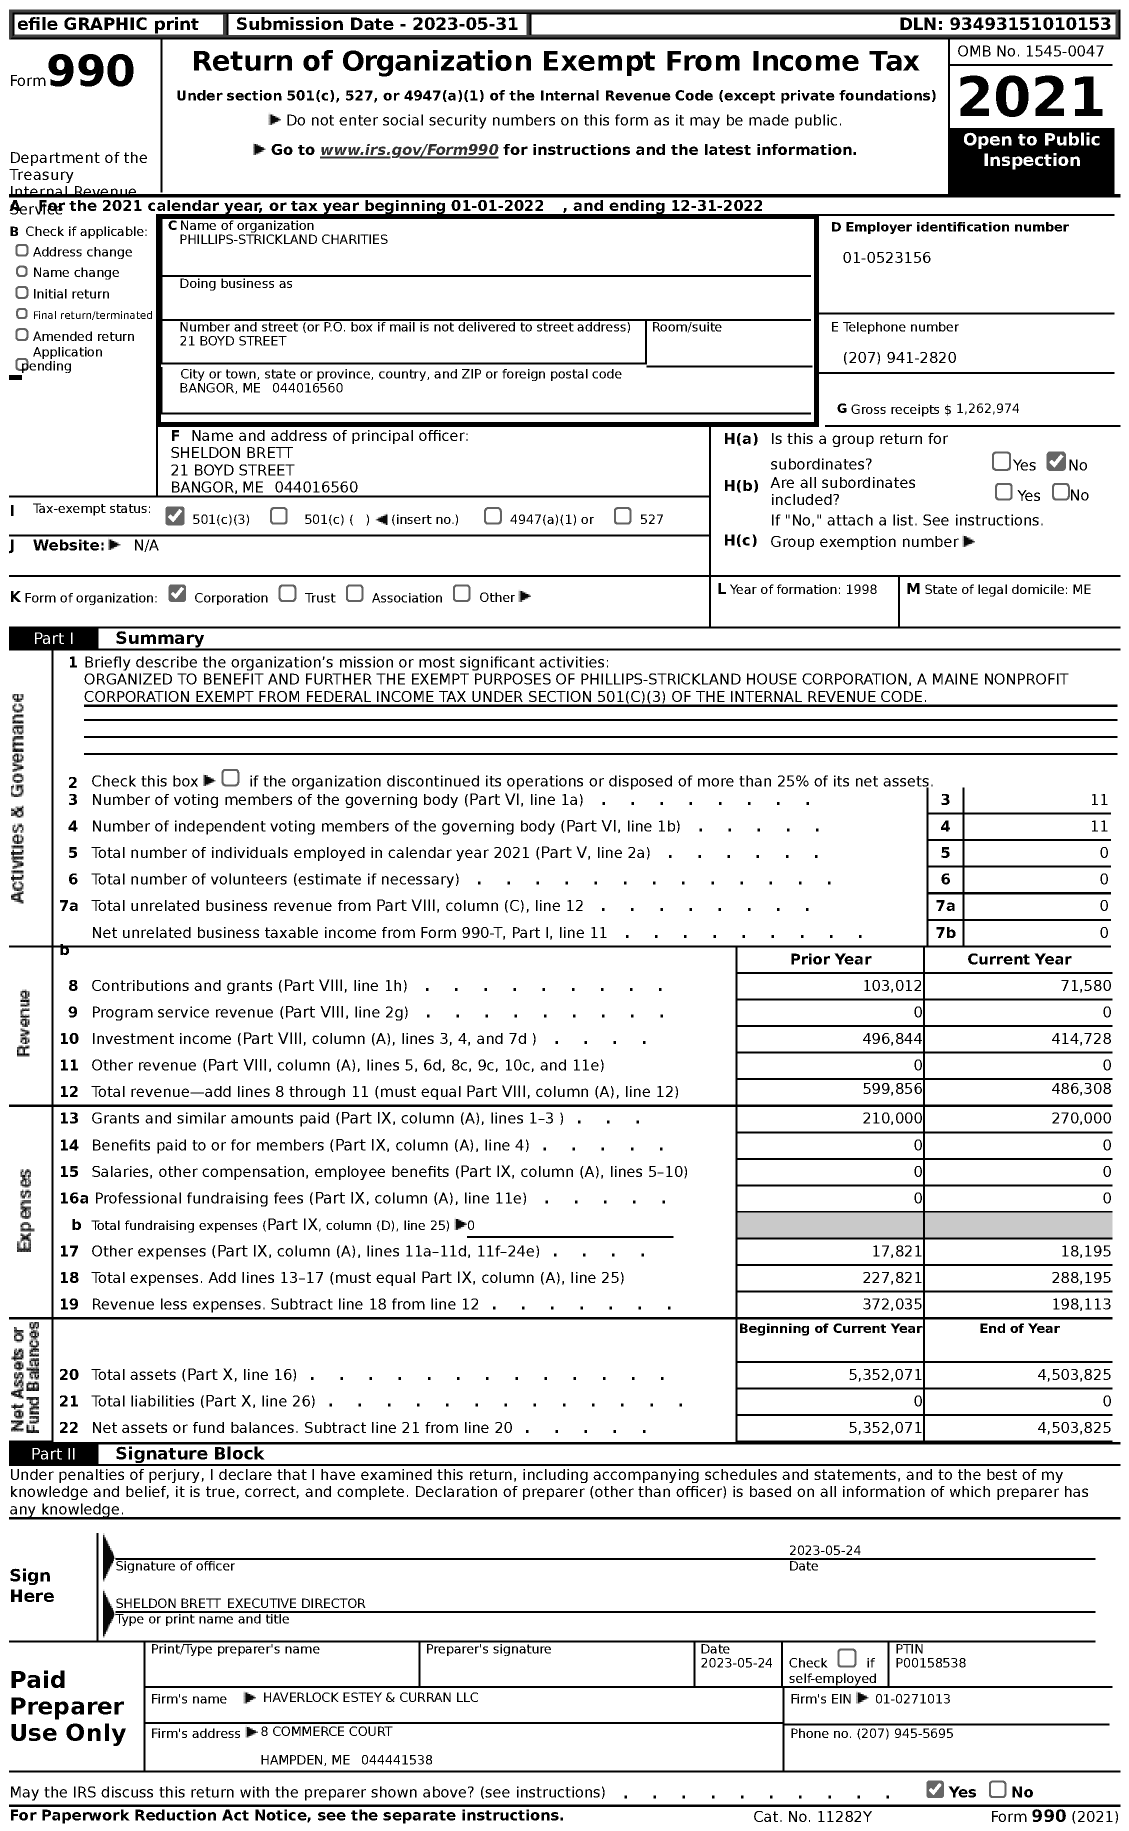 Image of first page of 2022 Form 990 for Phillips-Strickland Charities